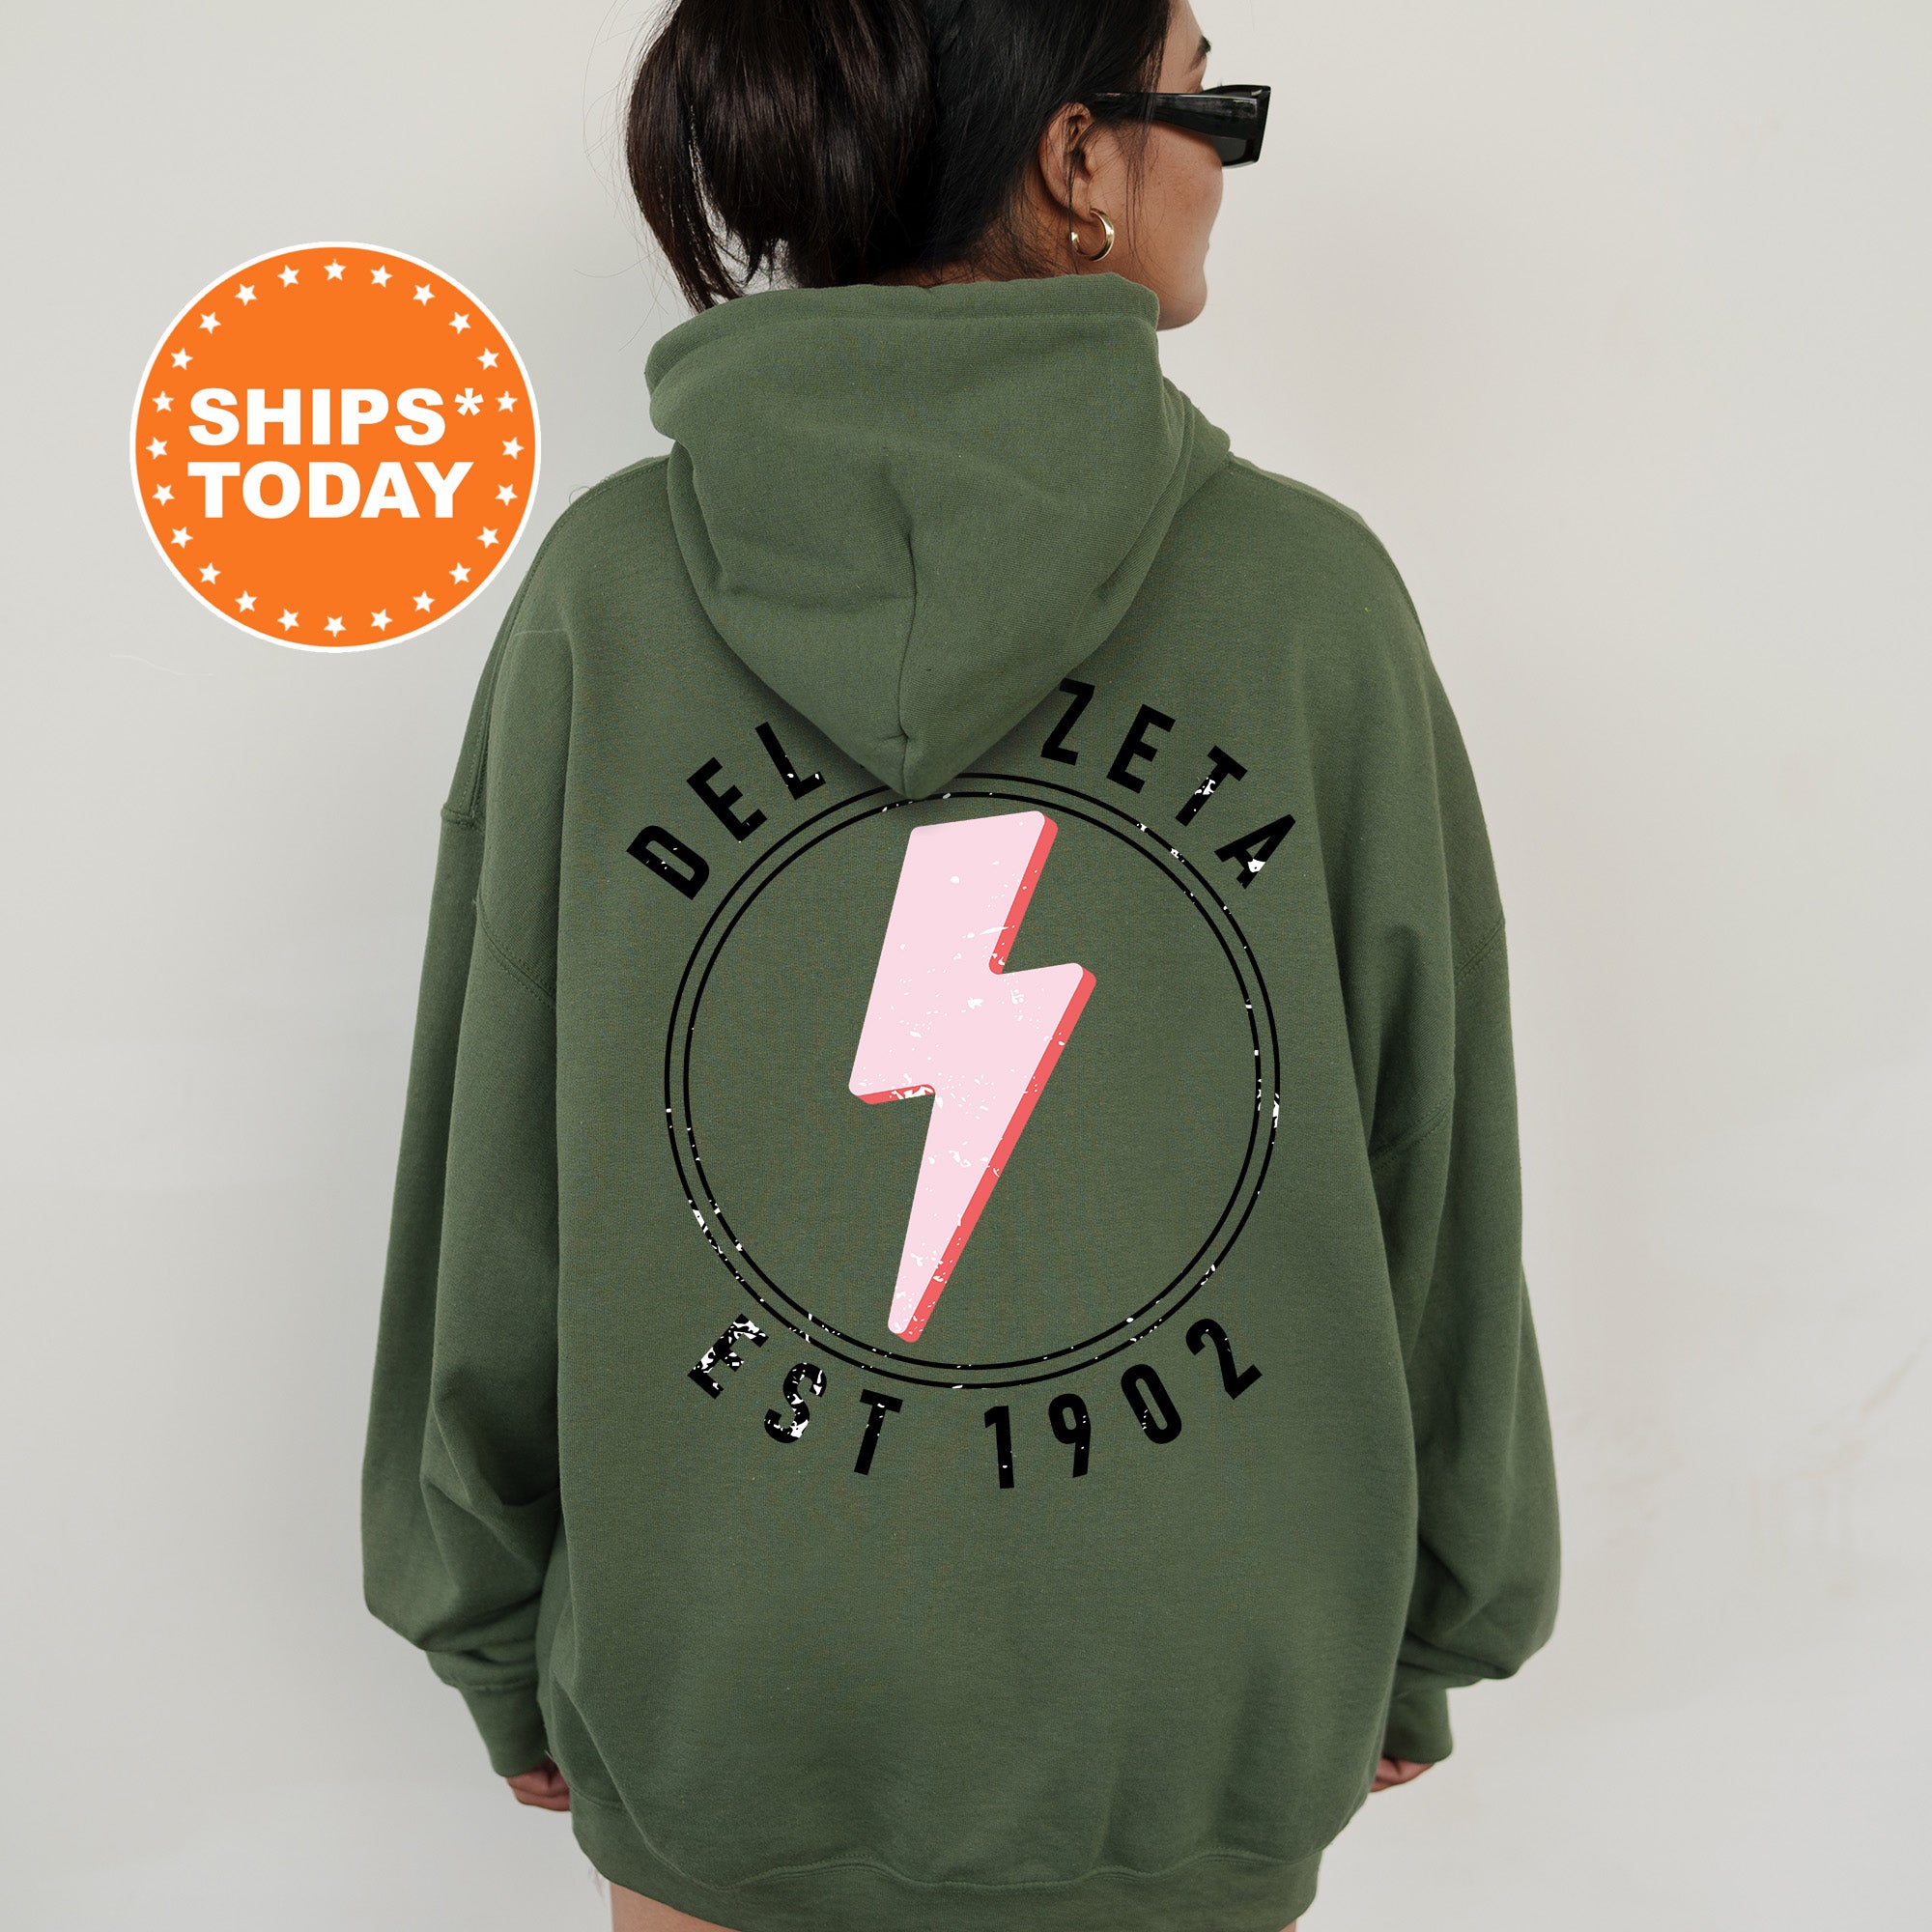 a woman wearing a green hoodie with a pink lightning bolt on it